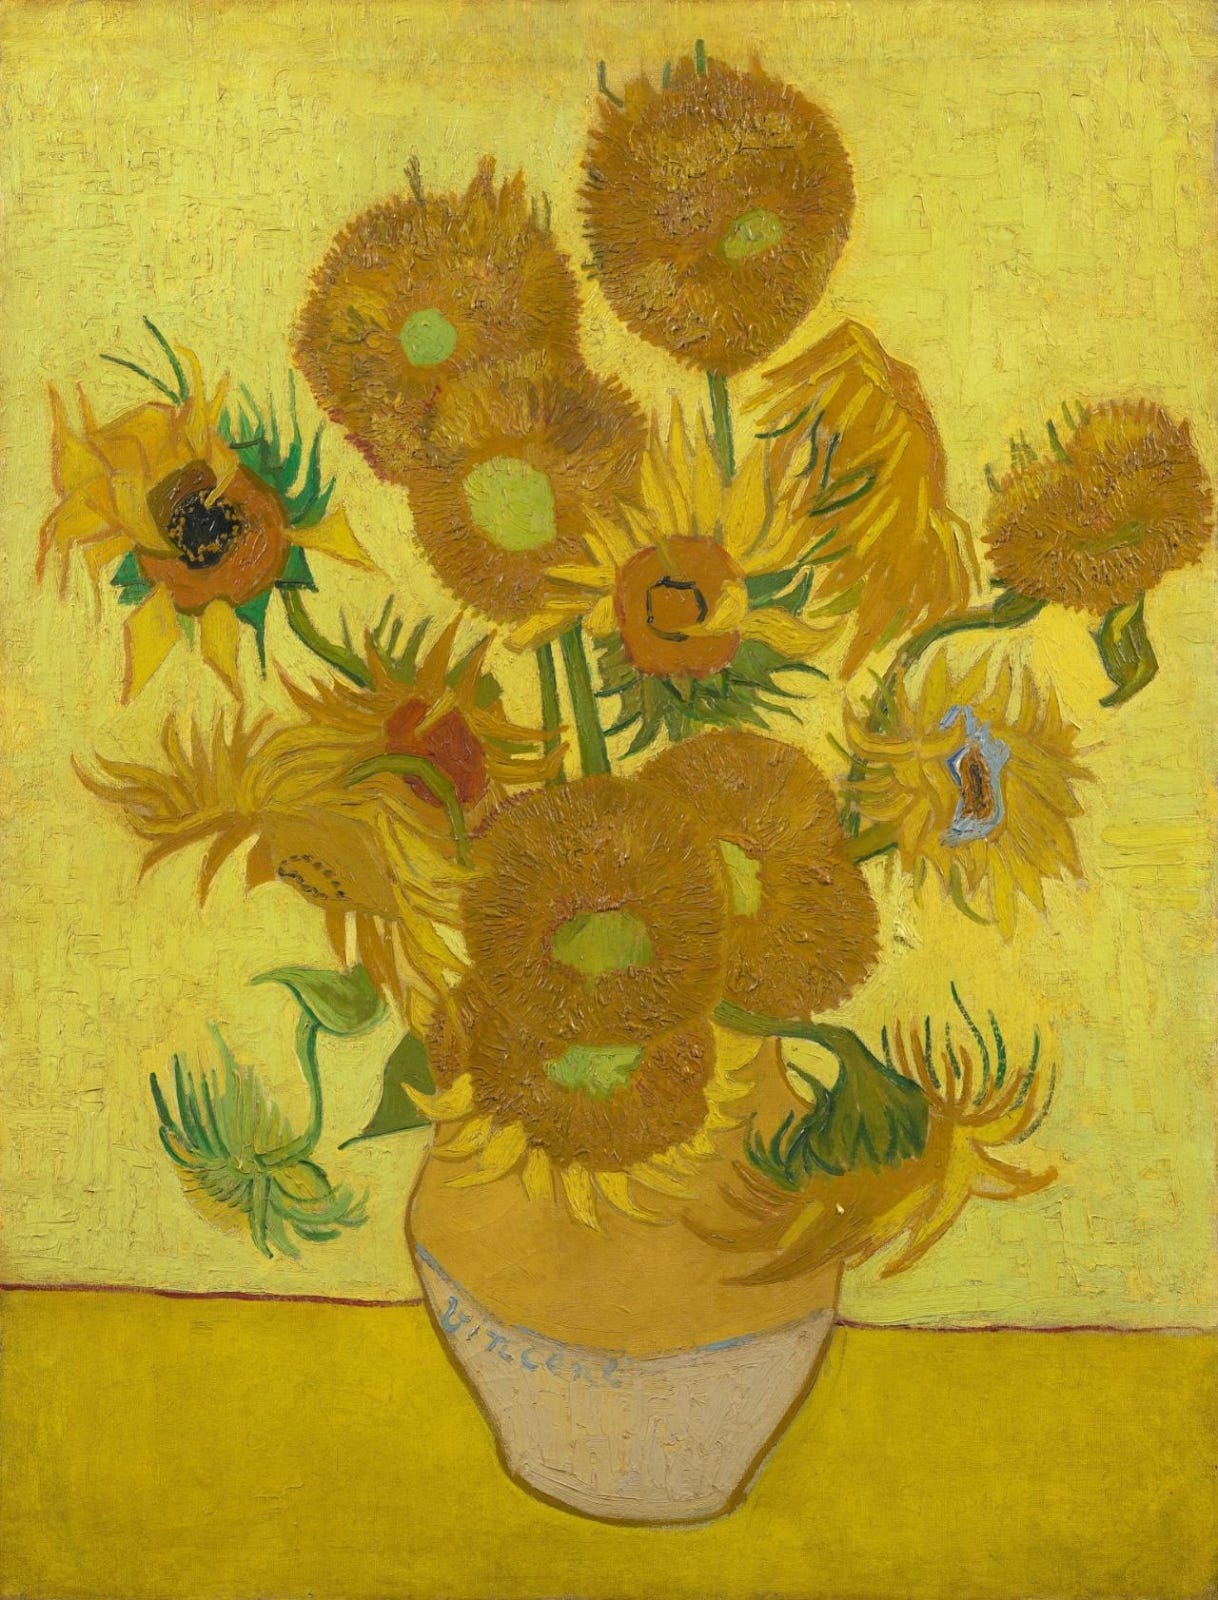 Fifteen sunflowers erupt out of a simple yellow vase against a blazing yellow background. Some of them are fresh and perky, ringed with halos of flickering, flame-like petals. Others are wilting and have begun to droop. The crisp green stems are the only contrasting color.          